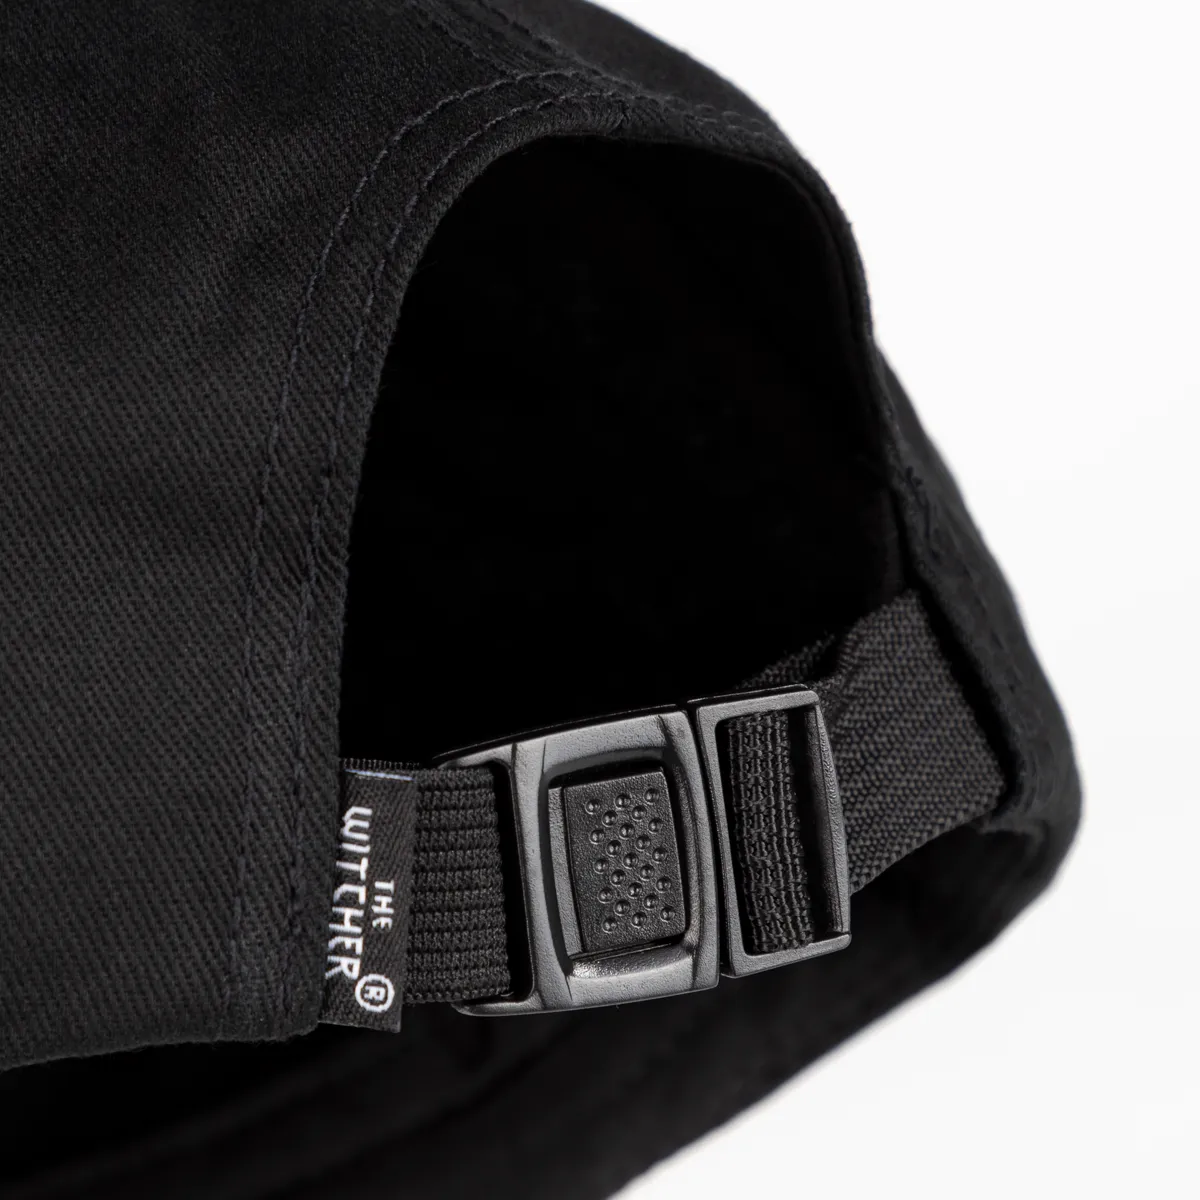 The Witcher Flatbill Cap "Patch" Black Image 6